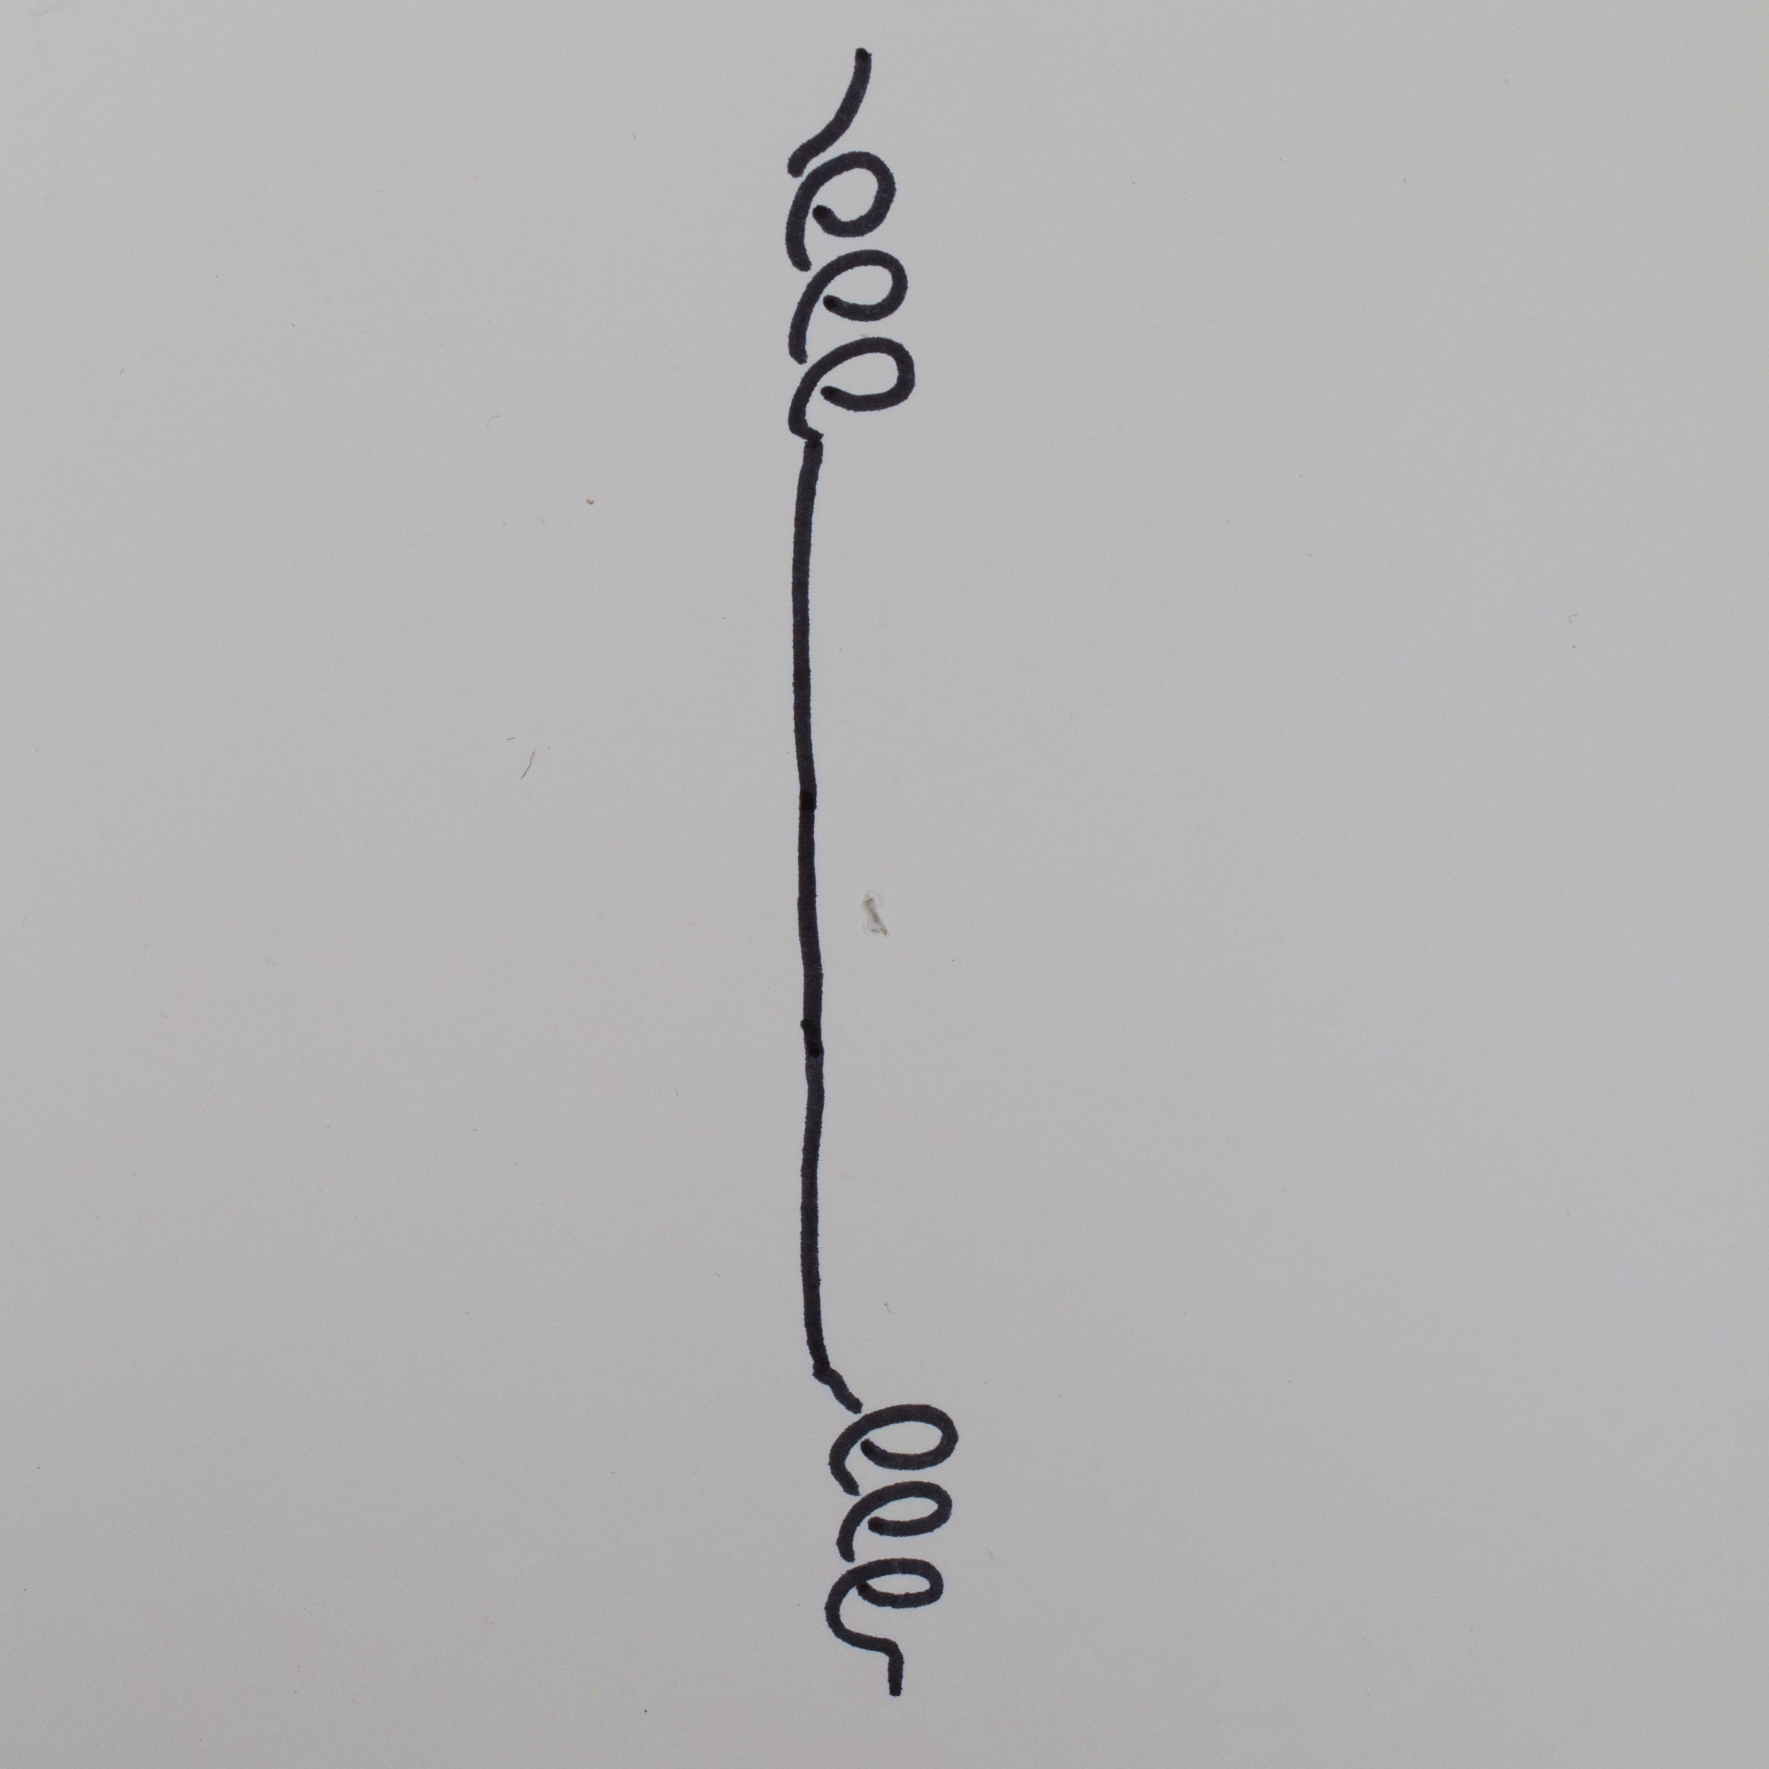 Diagrammatic drawing: a wire is represented showing that there is a section of coil towards the 12 o'clock on the page, then a straight wire section connecting it to another section of coil towards the 6 o'clock on the page.